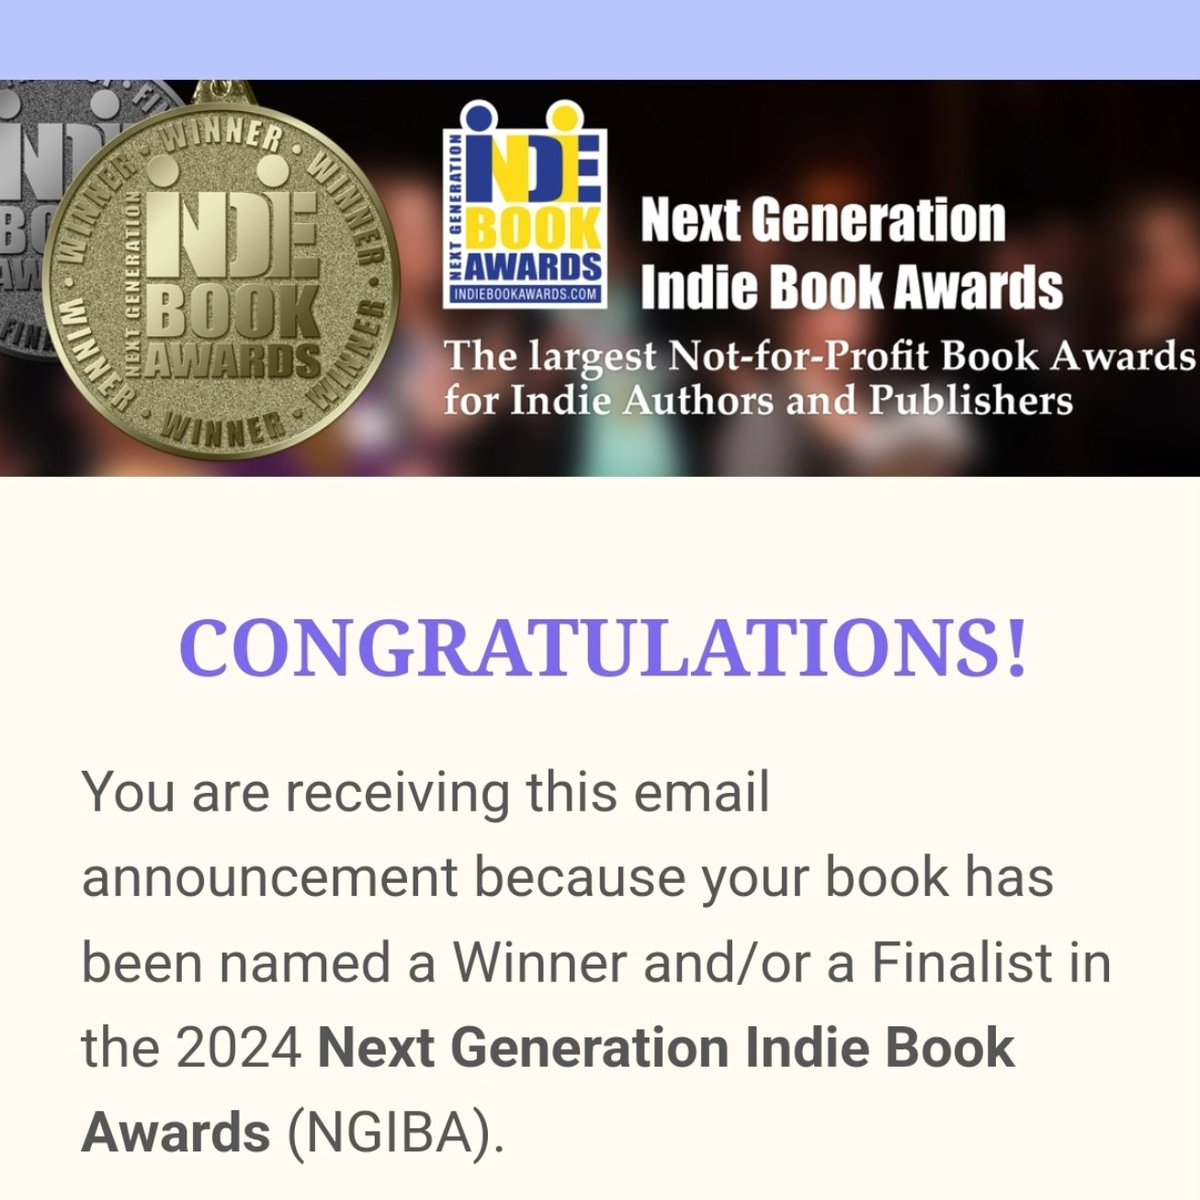 I'm happy to announce that my novel 'Mothers Vol.1' has just won its 13th award, this time in the 'Social Change' category. Thank you to all of you who have supported me on my literary journey, and if you haven't yet, please order a copy! Order yours here: